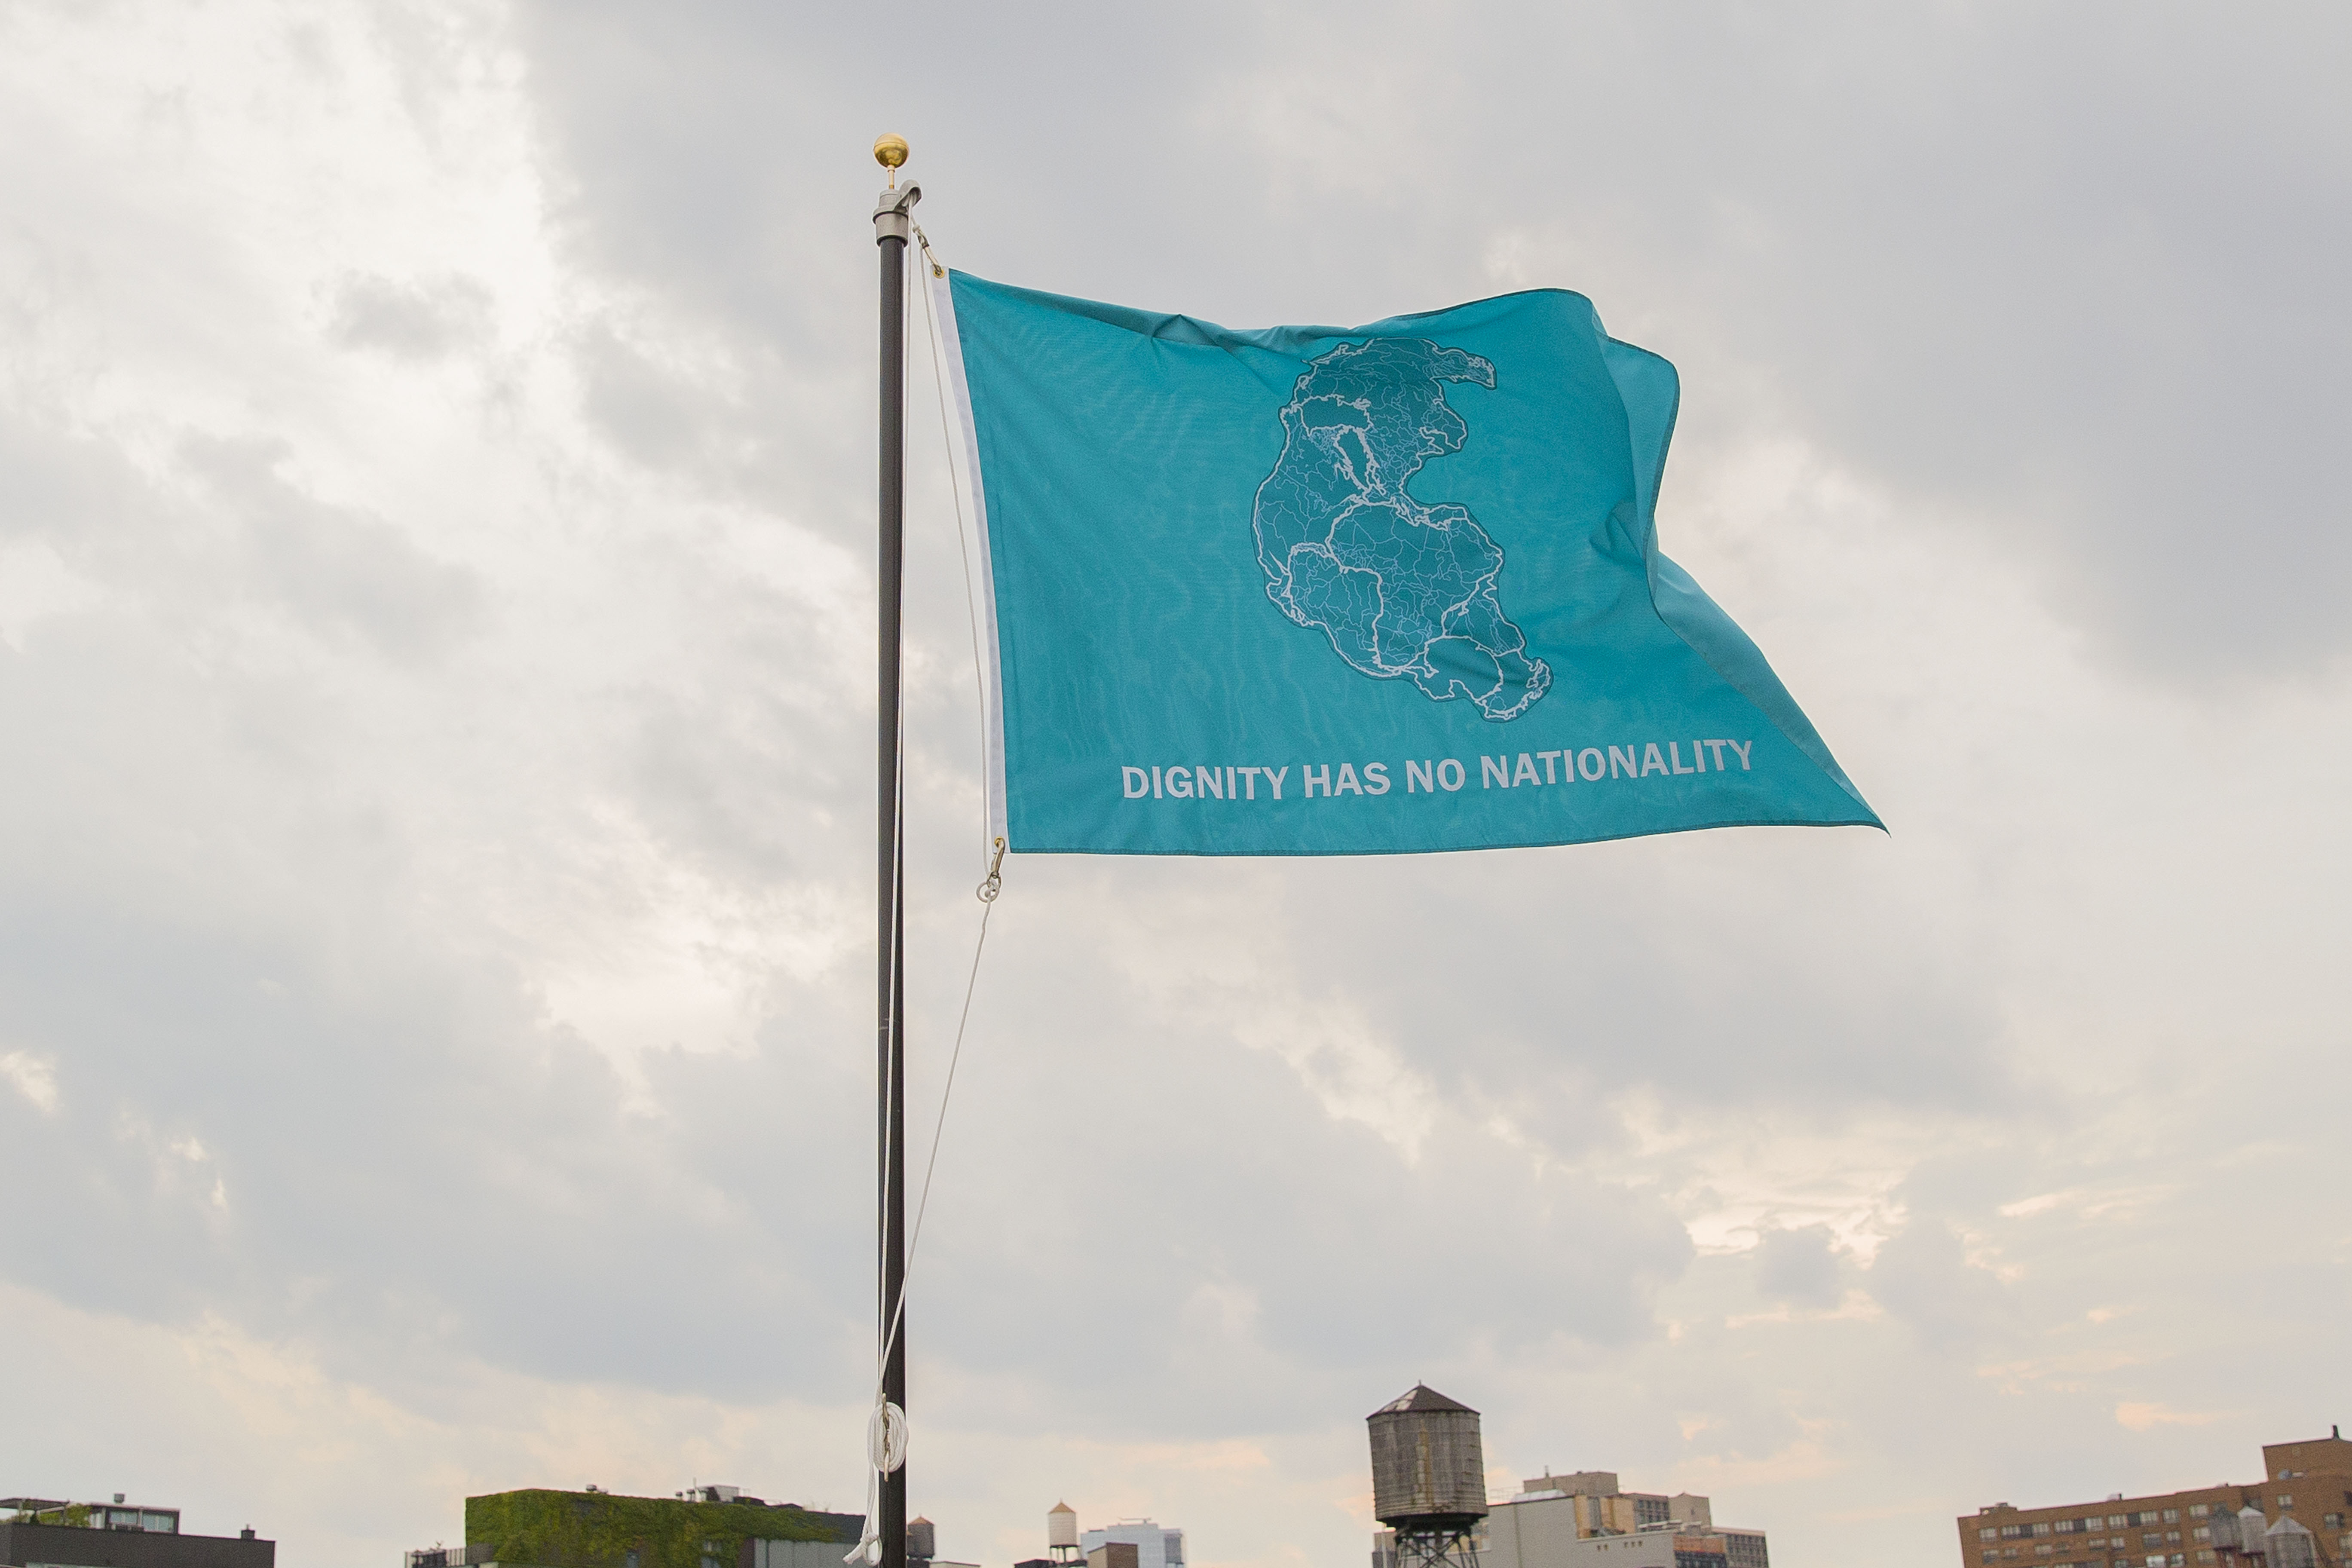 Light blue flag flying that says "dignity has no nationality" in all caps with a drawing of Pangea in the center. 